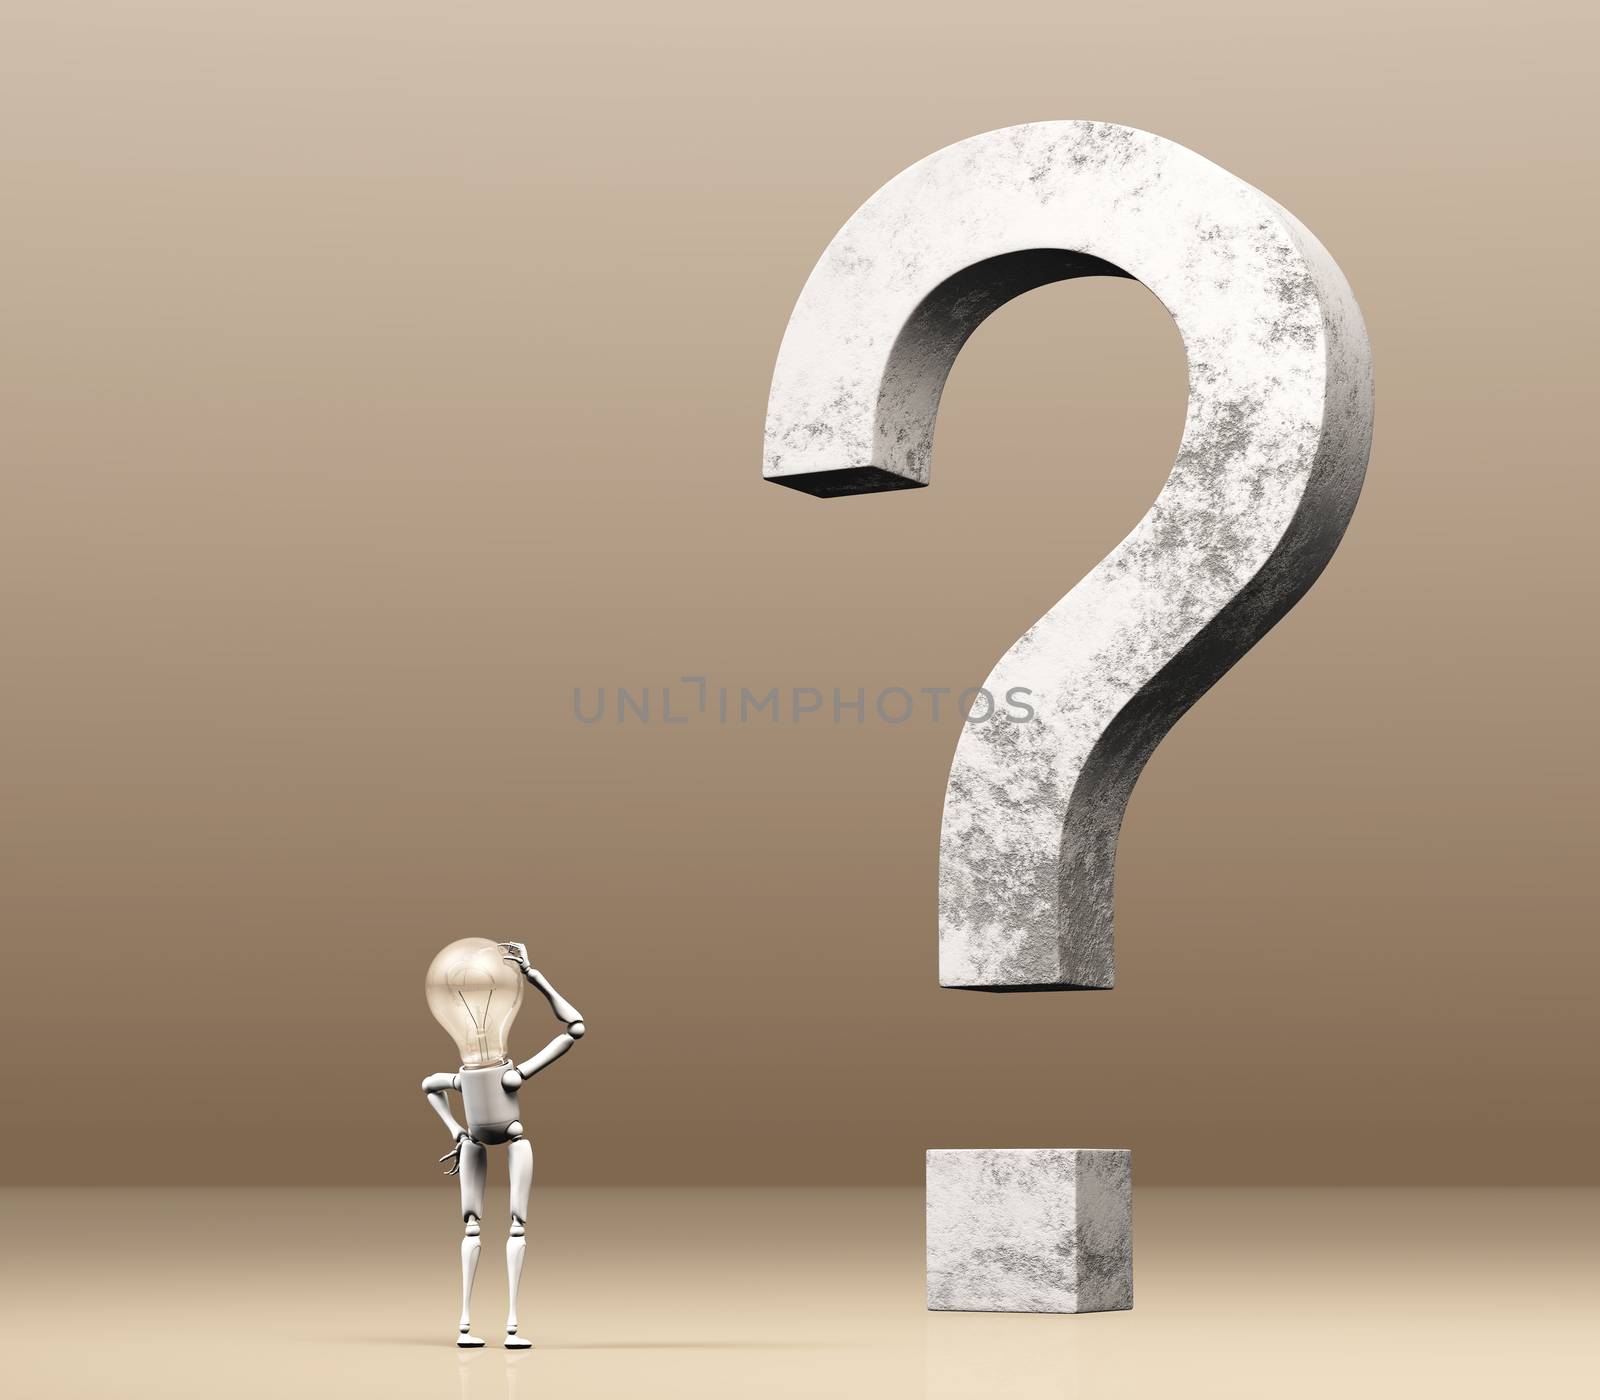 a lamp character is watching a big upright question mark made of stone while scratches his head with the right hand as demonstration of perplexity, on a brown cream background